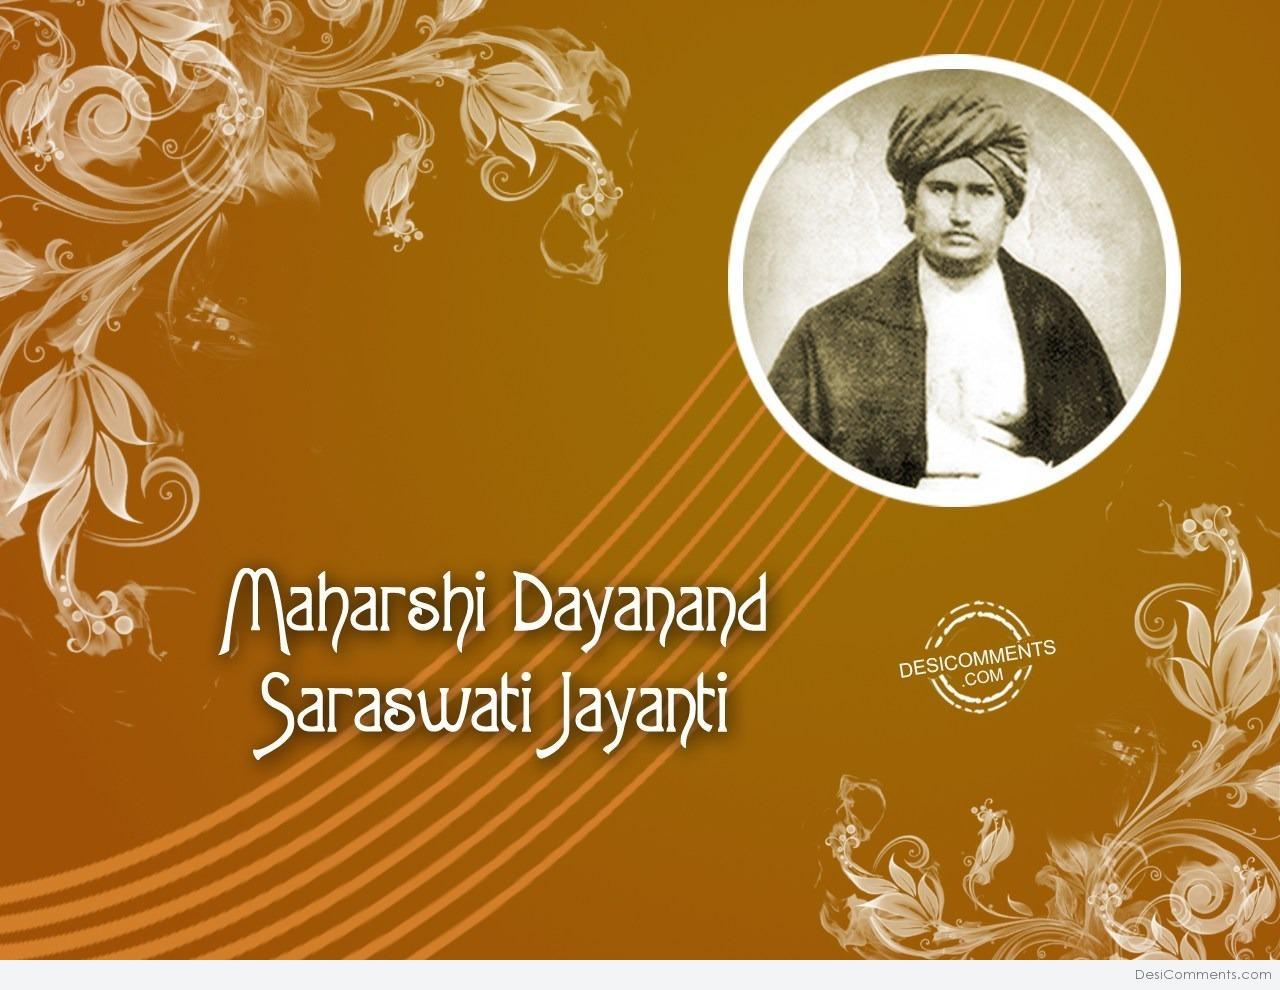 Wishing You And Your Family A Very Happy Maharshi Dayanand